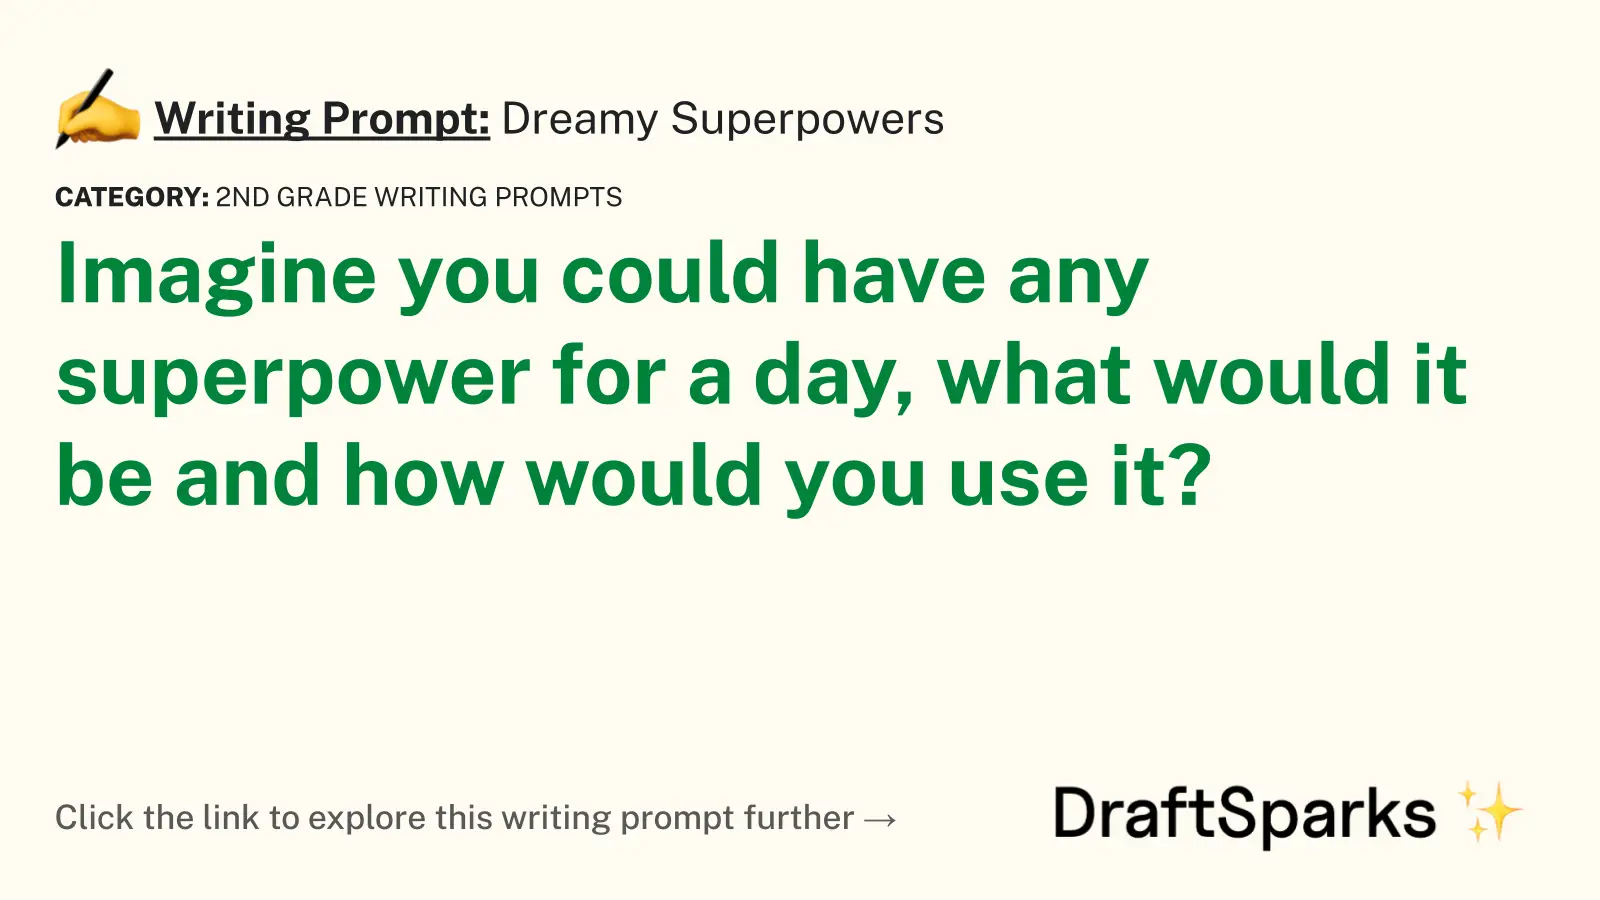 Dreamy Superpowers